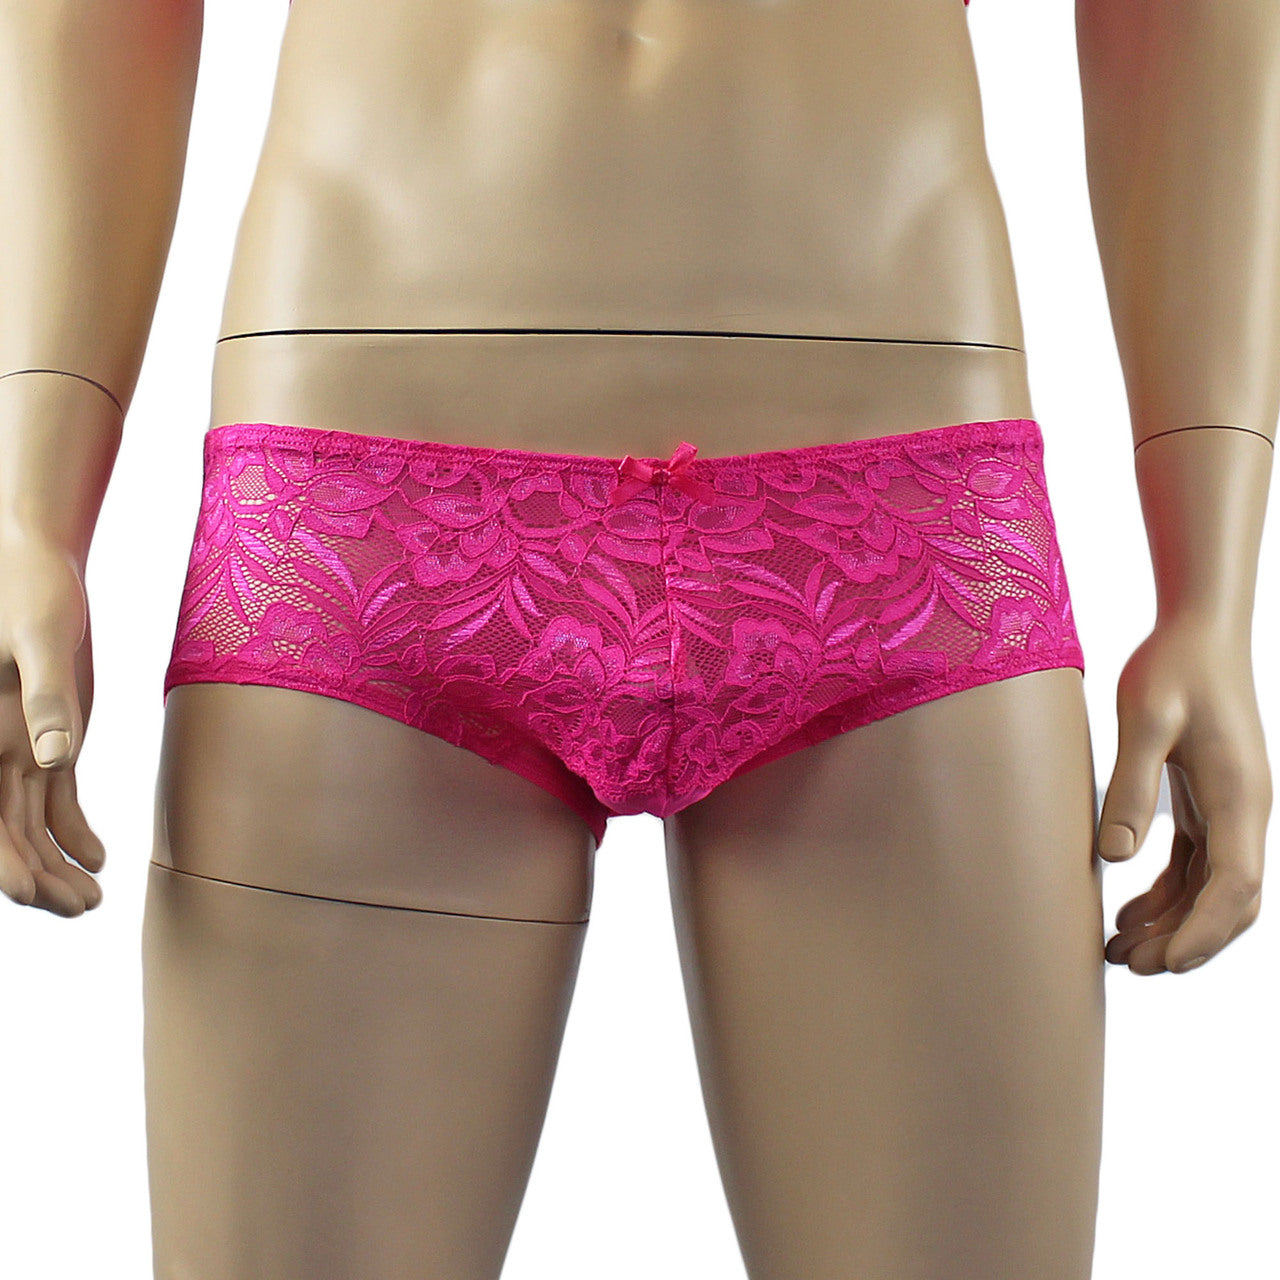 Mens Kristy Sexy Lace Camisole Top and Panty Brief Hot Pink